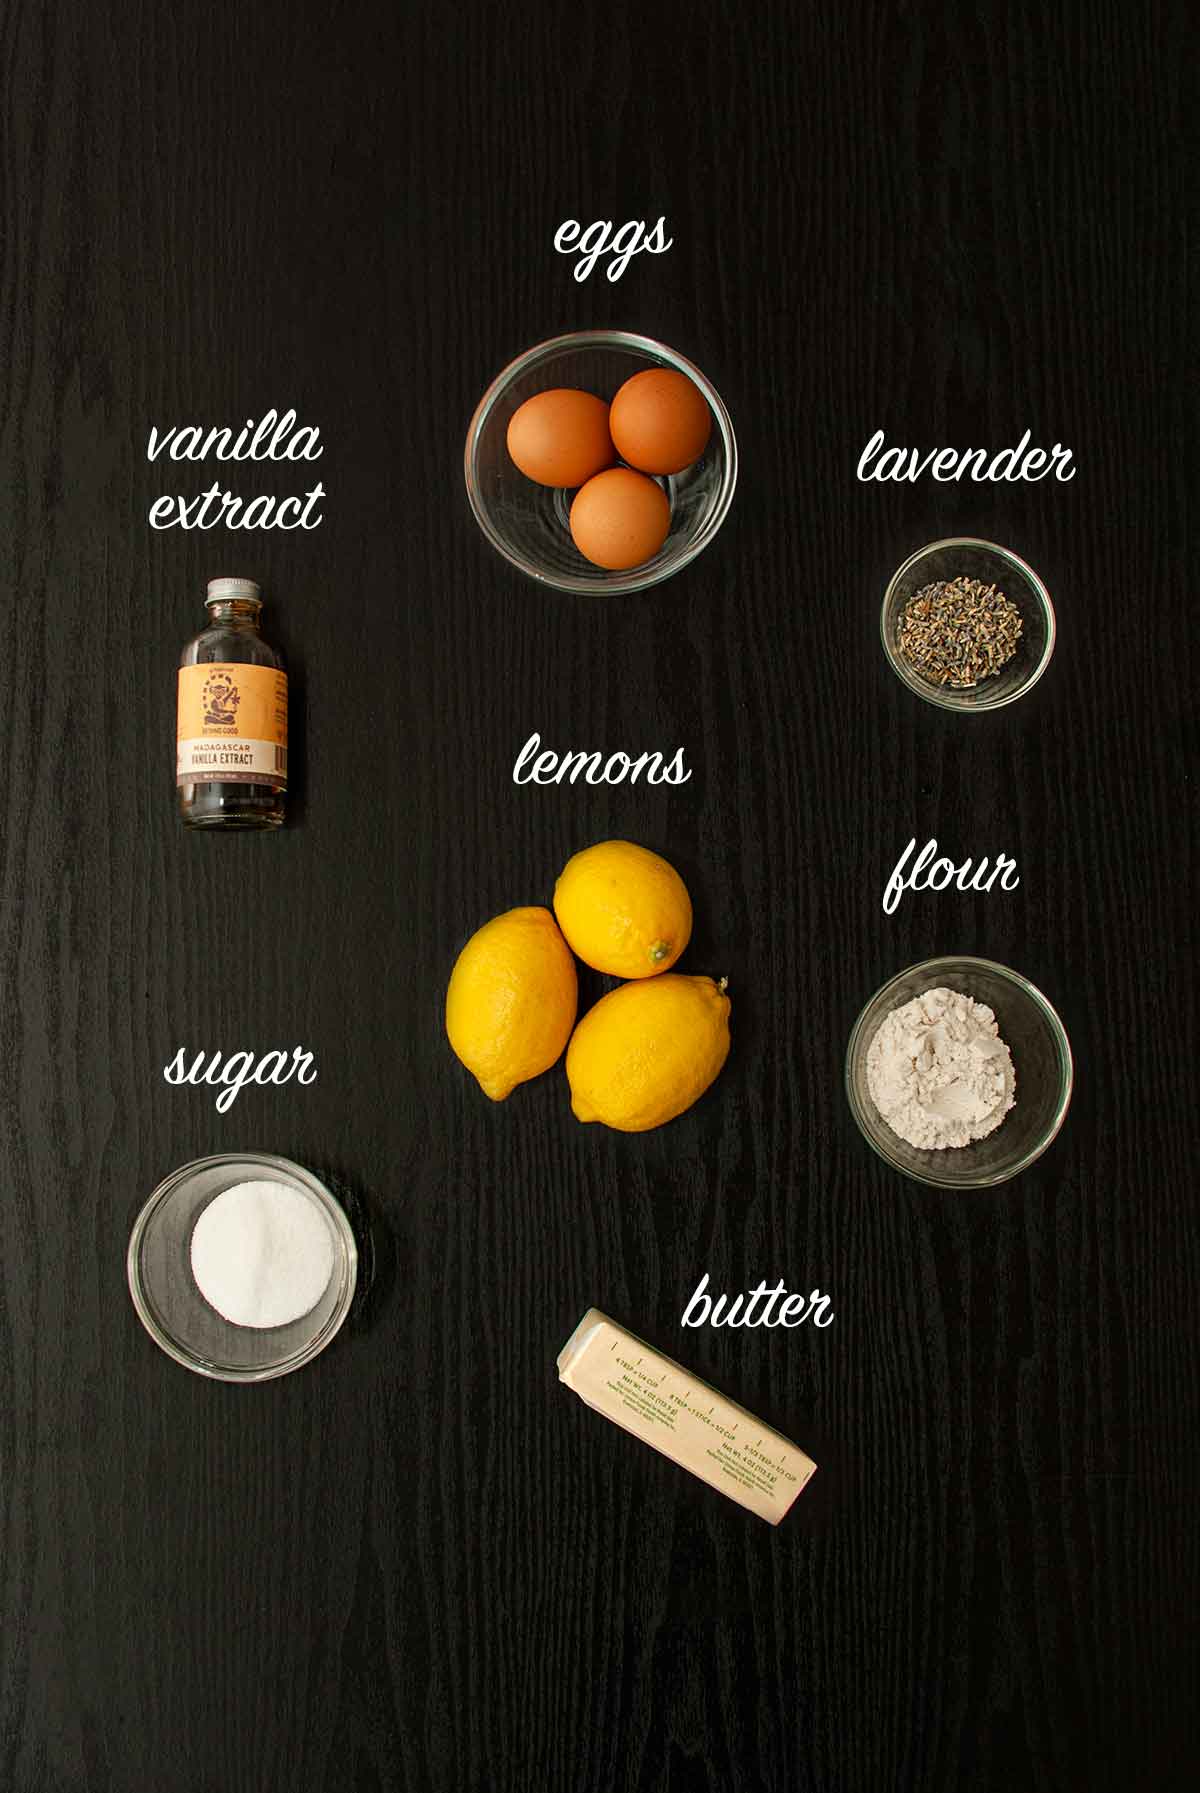 7 ingredients on a tables with lables describing what they are.